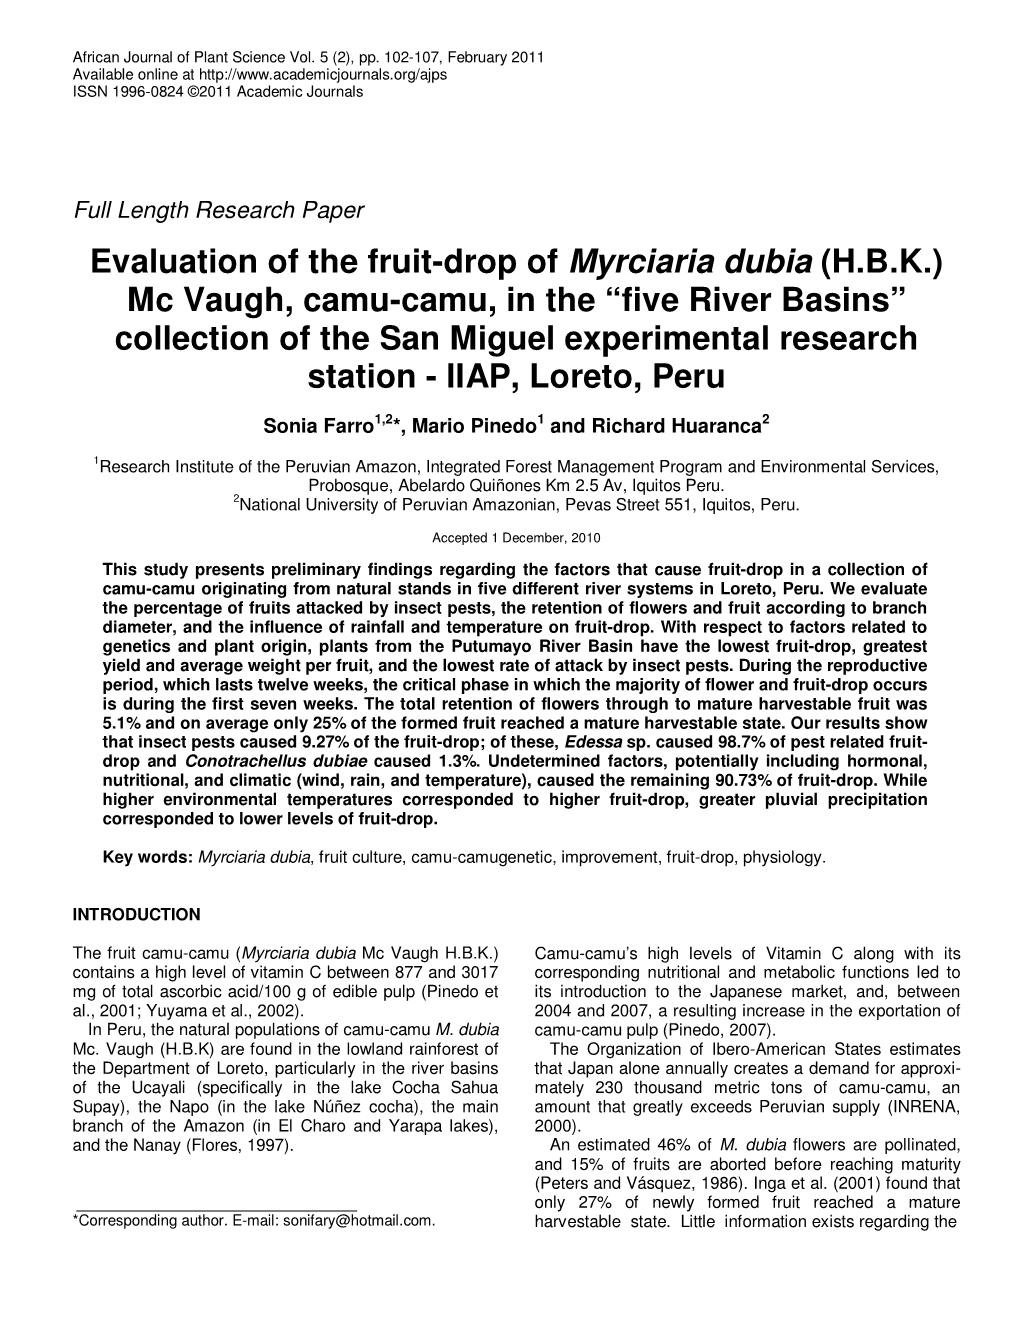 Evaluation of the Fruit-Drop of Myrciaria Dubia